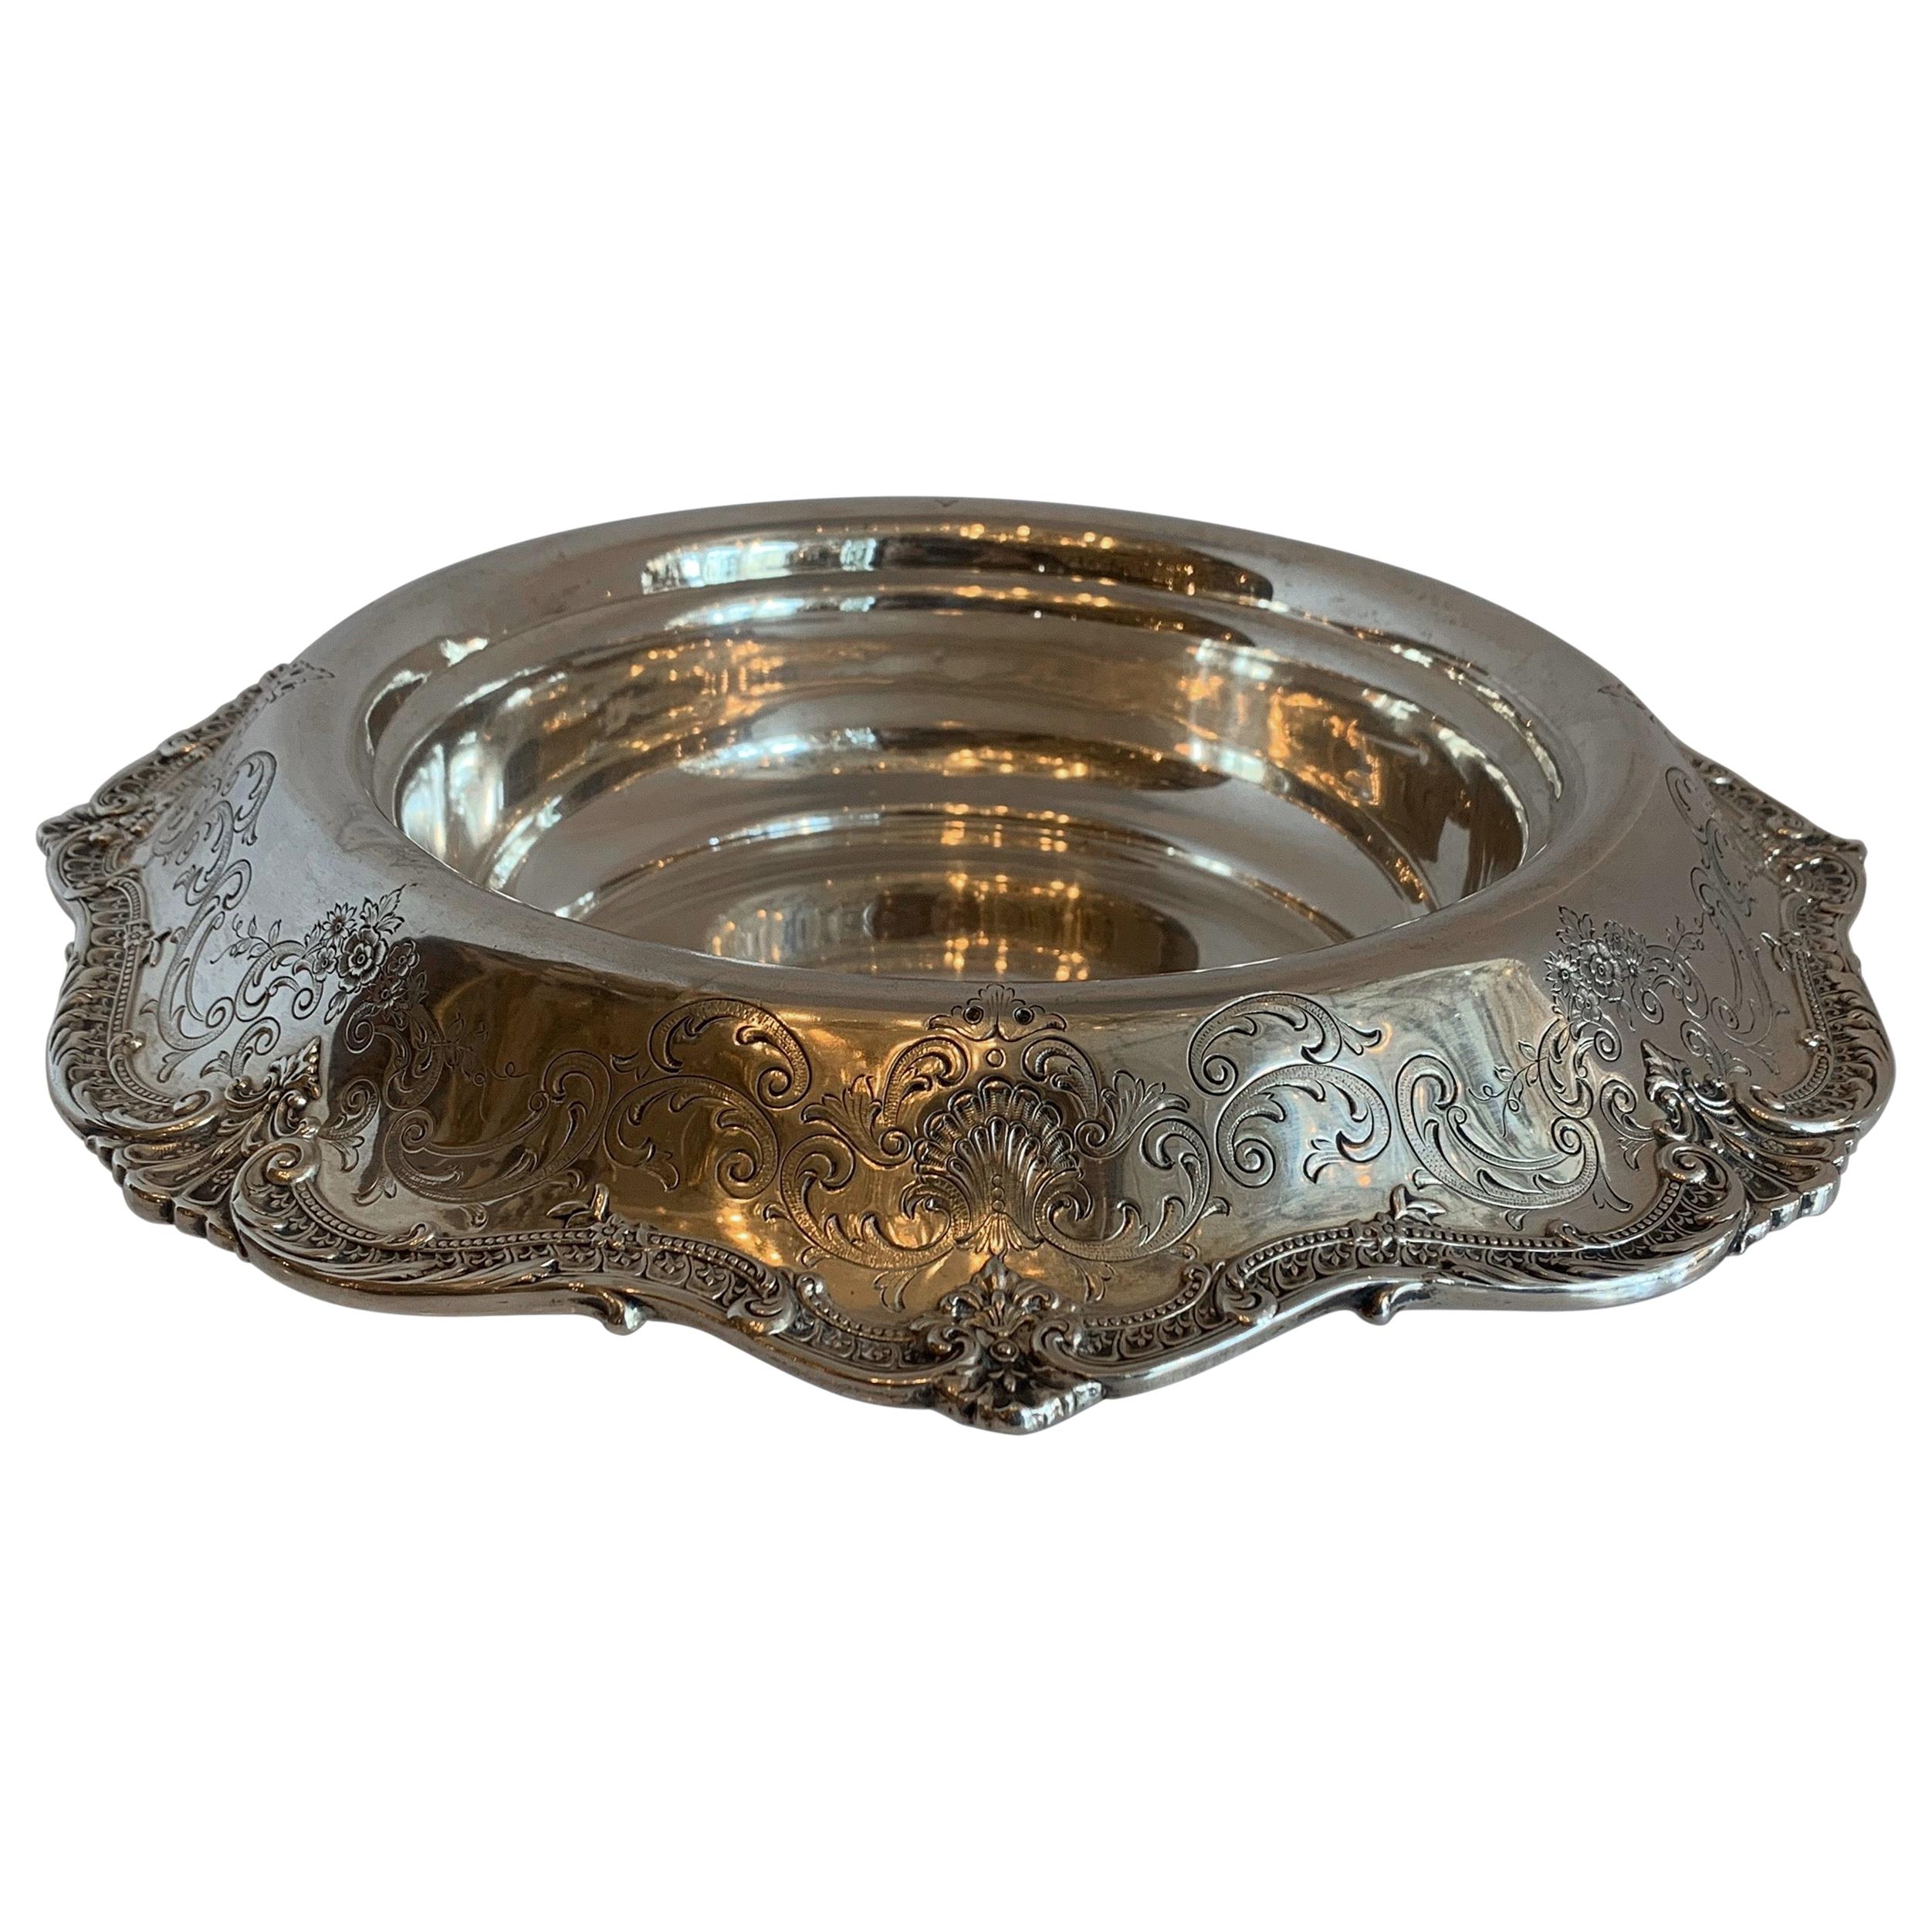 Wonderful Large Sterling Silver Spaulding & Co. Hand Chased Centerpiece Bowl